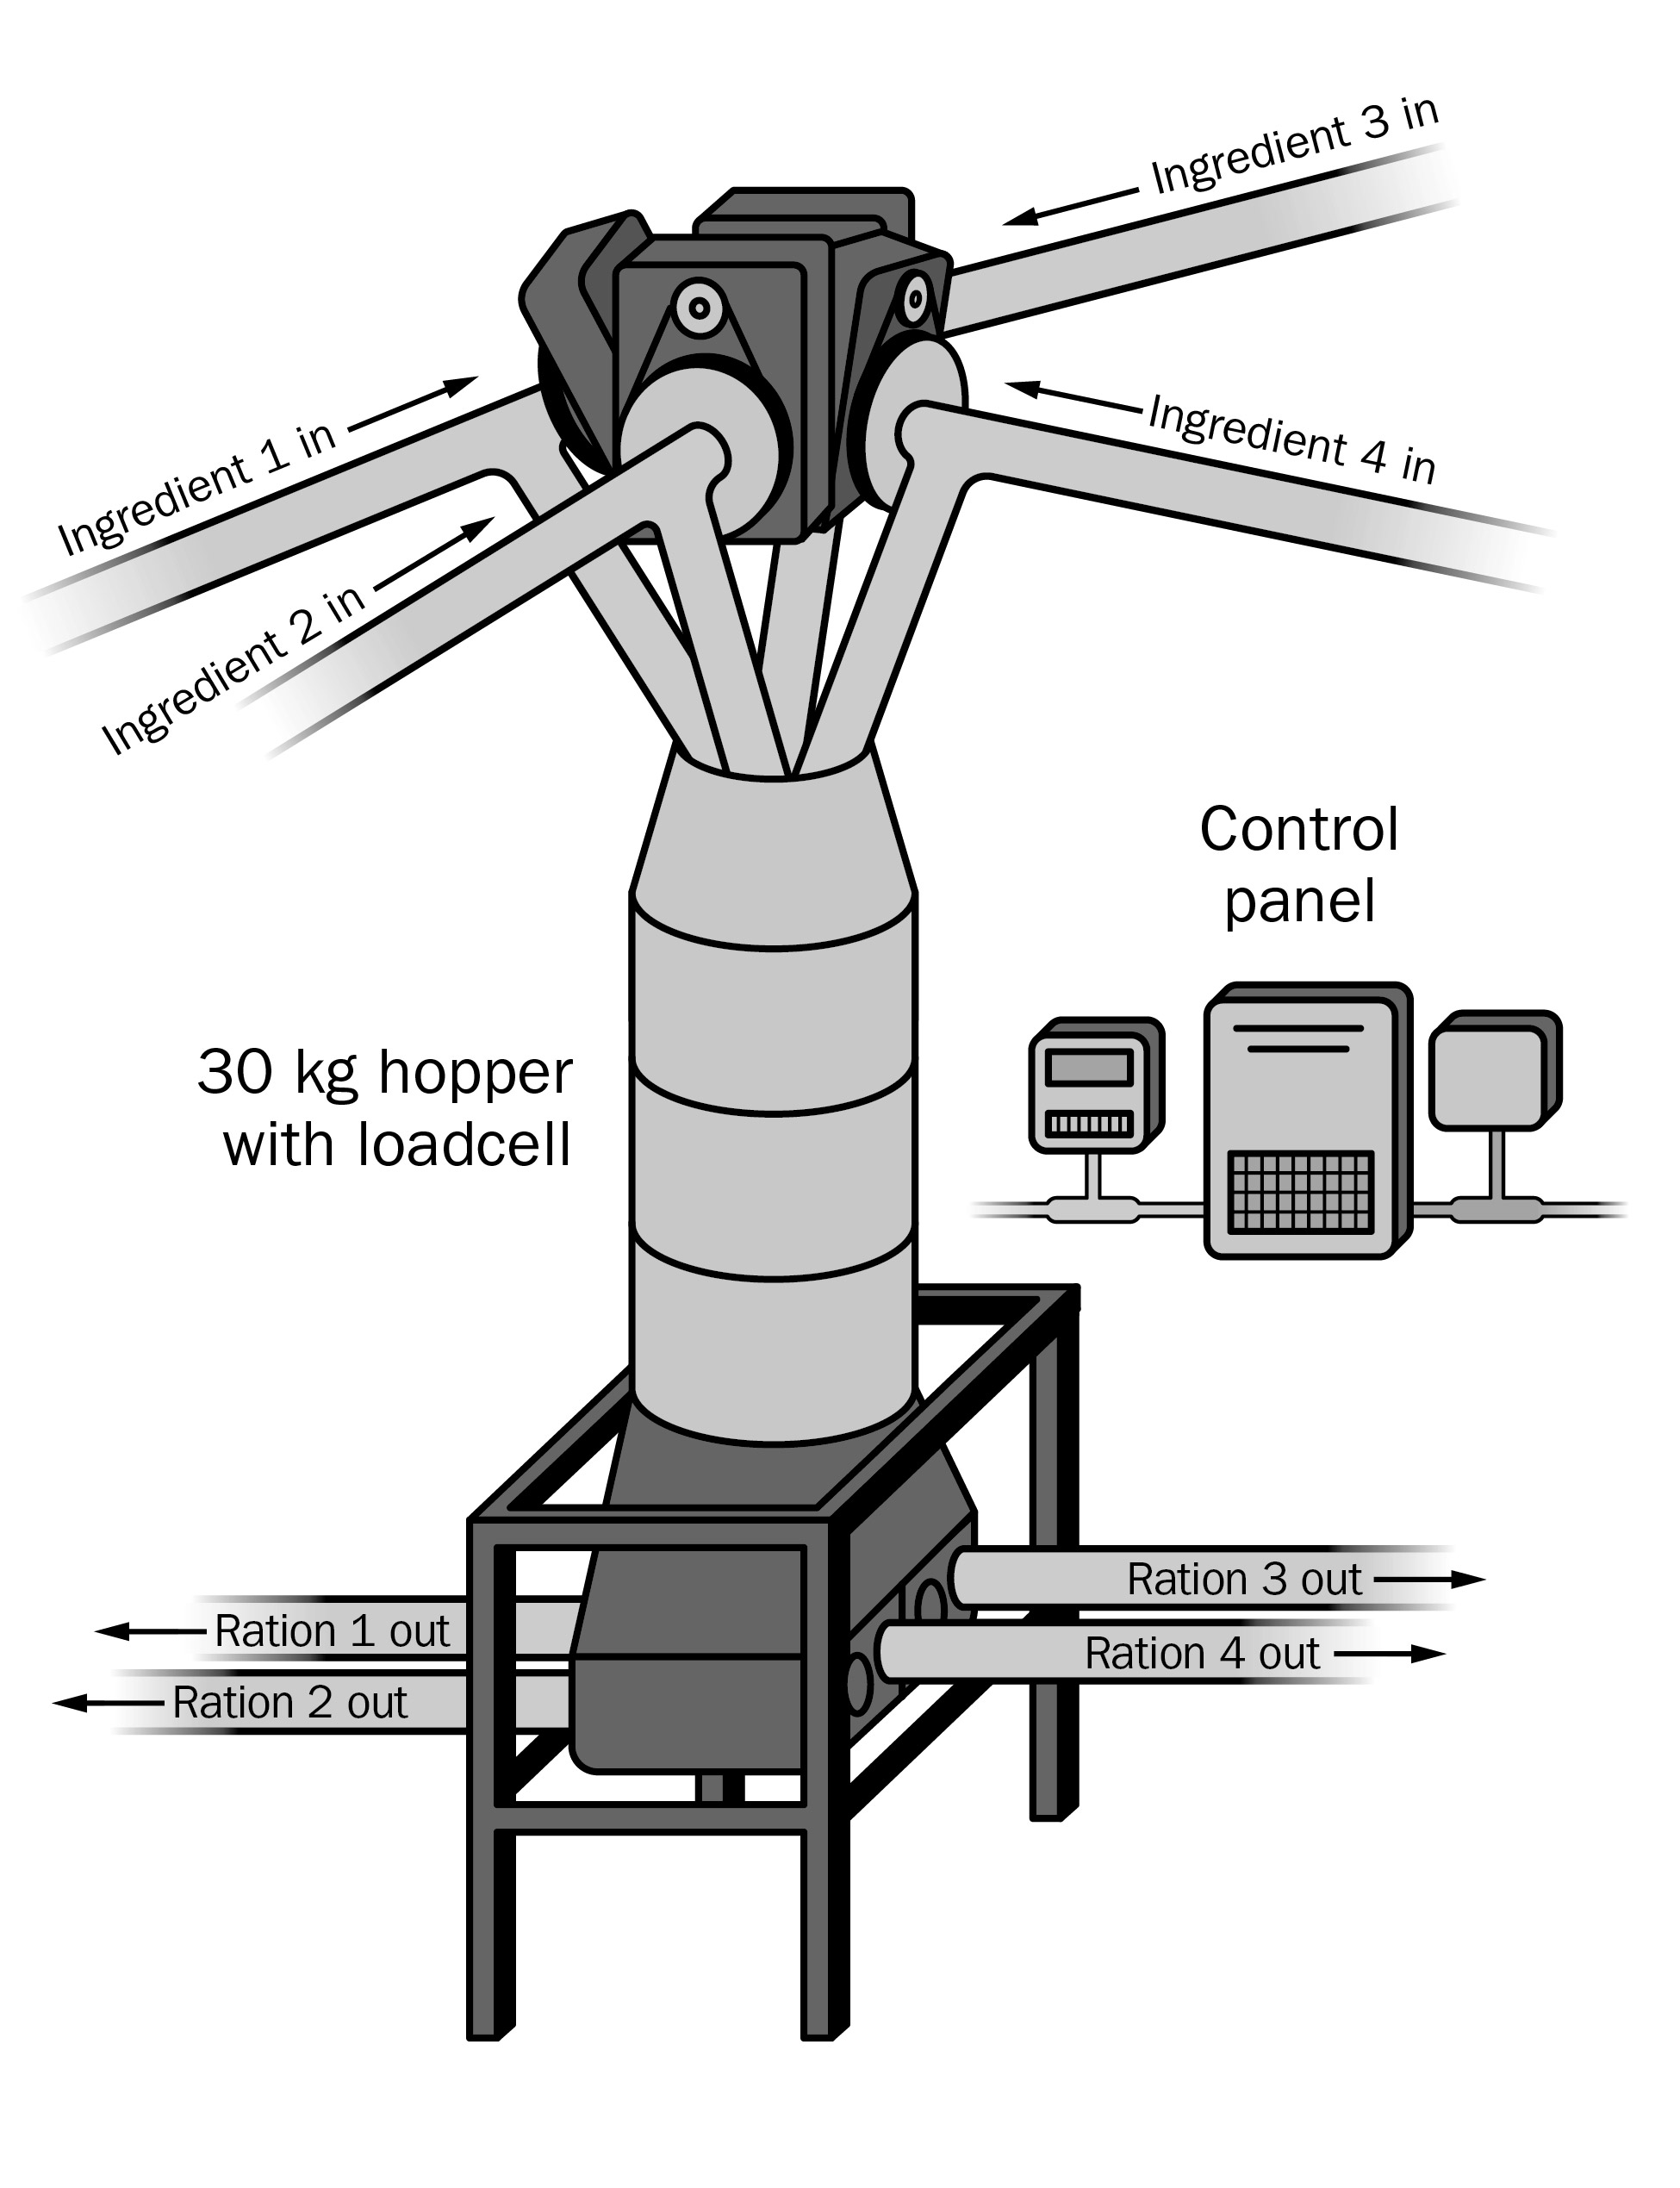 Illustration of a feed mixing system. An electronic control panel is shown on the right. A cylindrical vertical pipe that has several other pipes extending from its top and bottom is shown on the left.